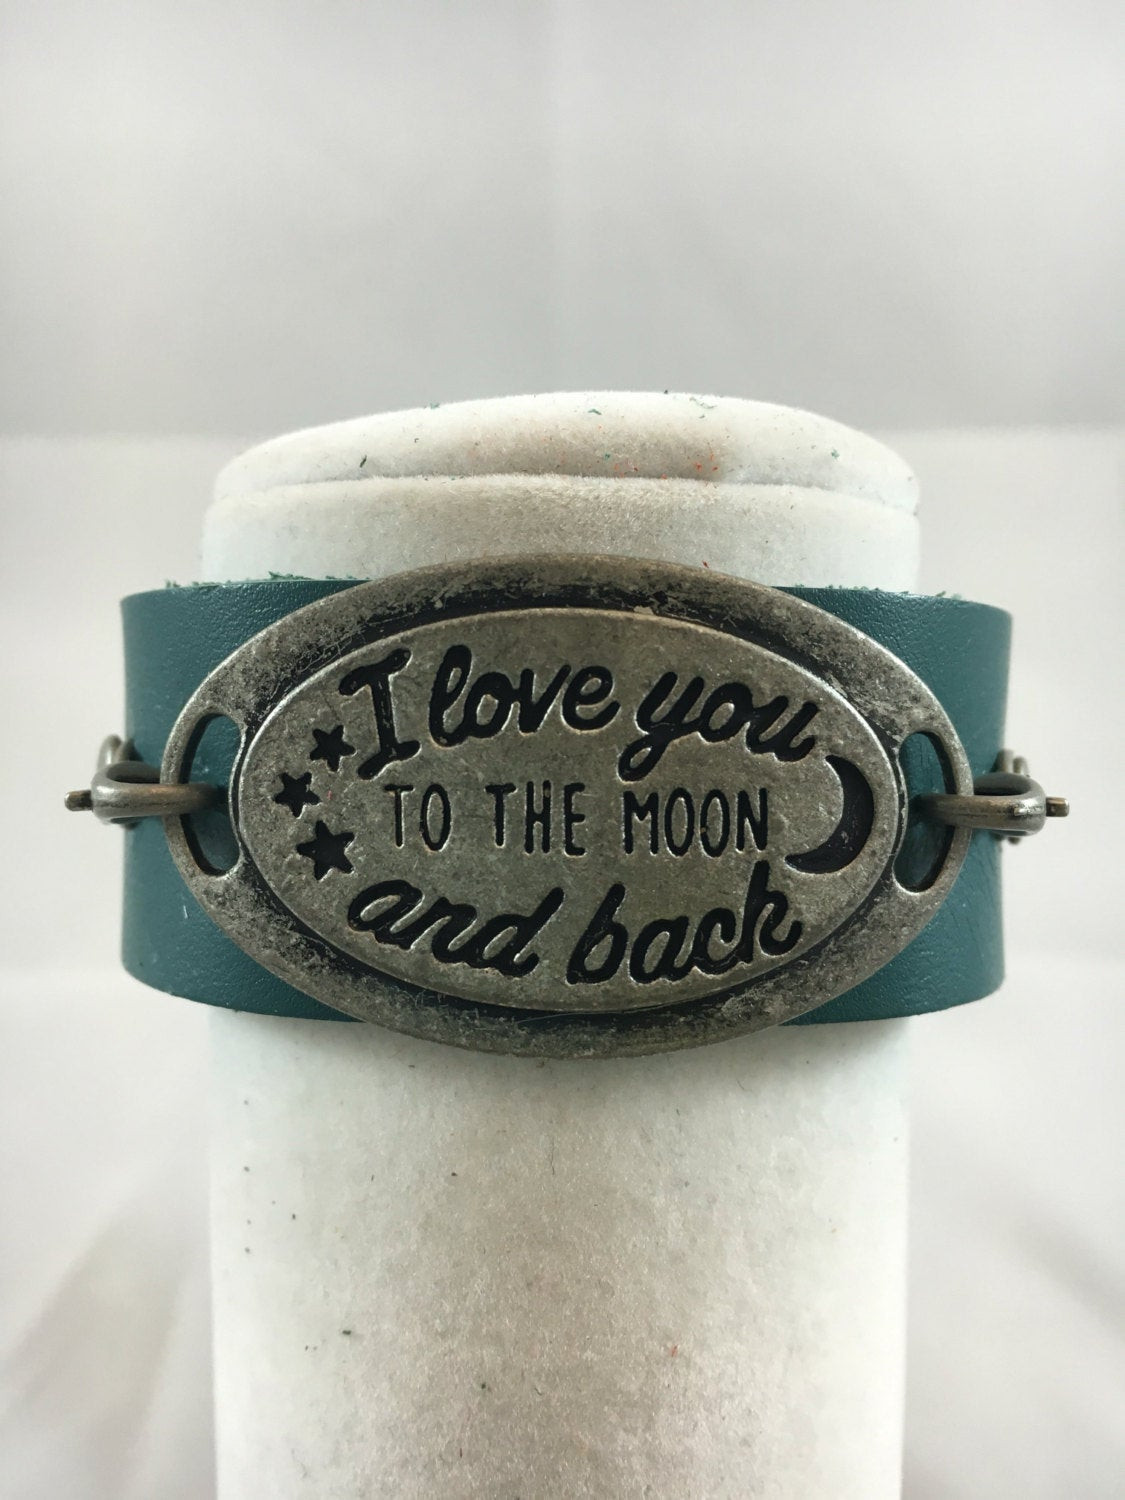 Love You To The Moon And Back Bracelet
 I Love You To The Moon And Back Teal leather bracelet